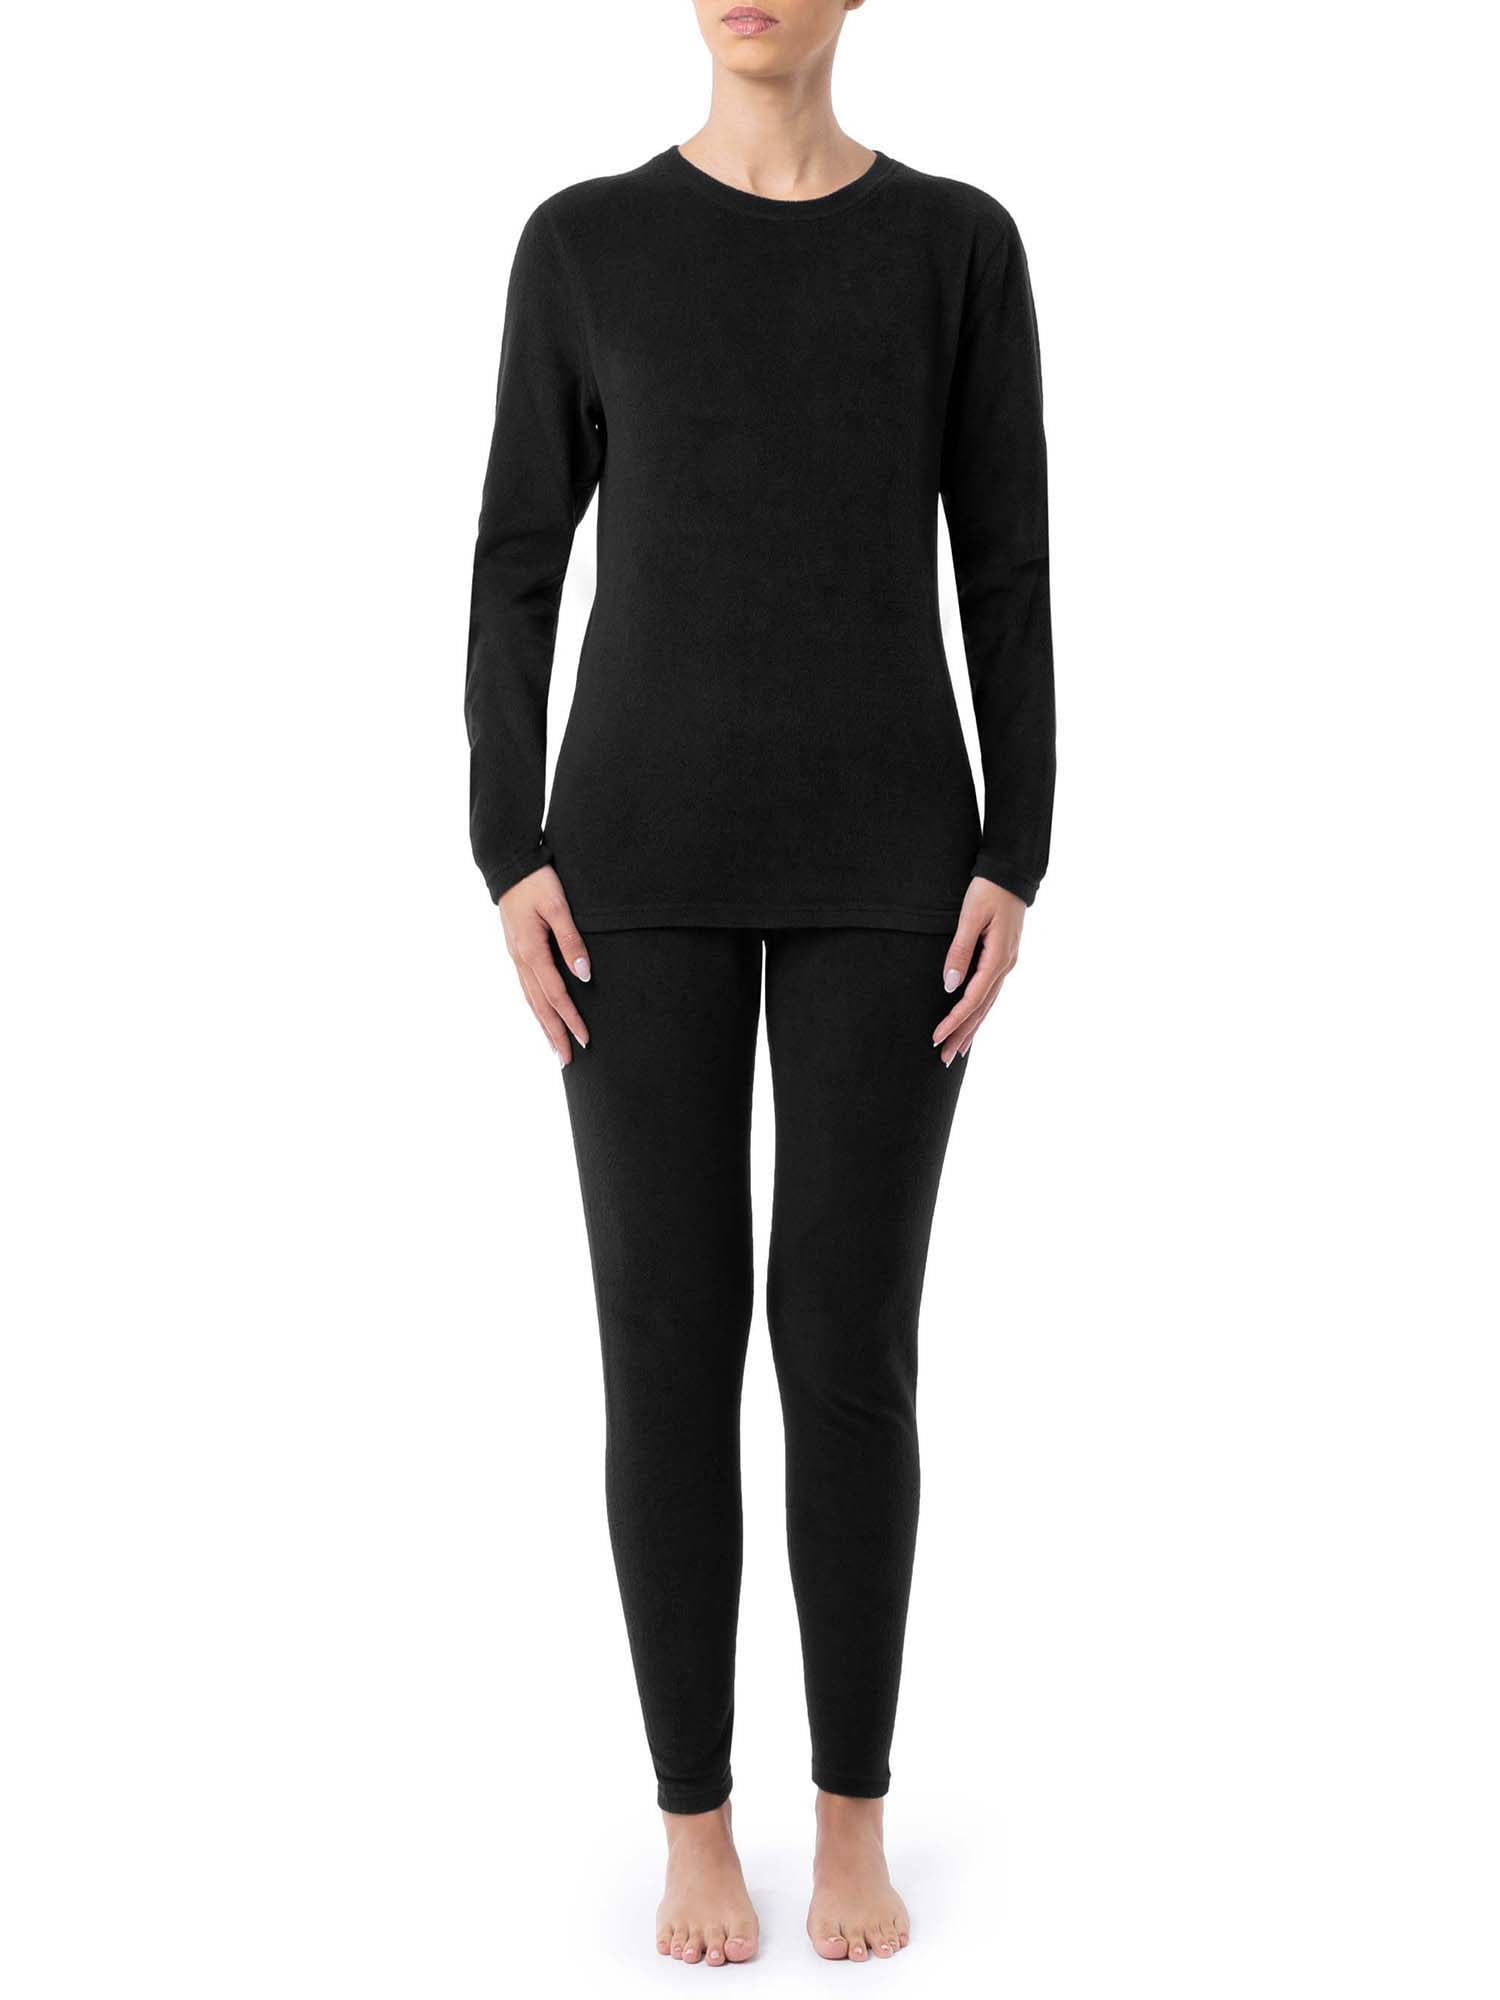 Fruit of the Loom Women's & Women's Plus Stretch Fleece Thermal Top and ...